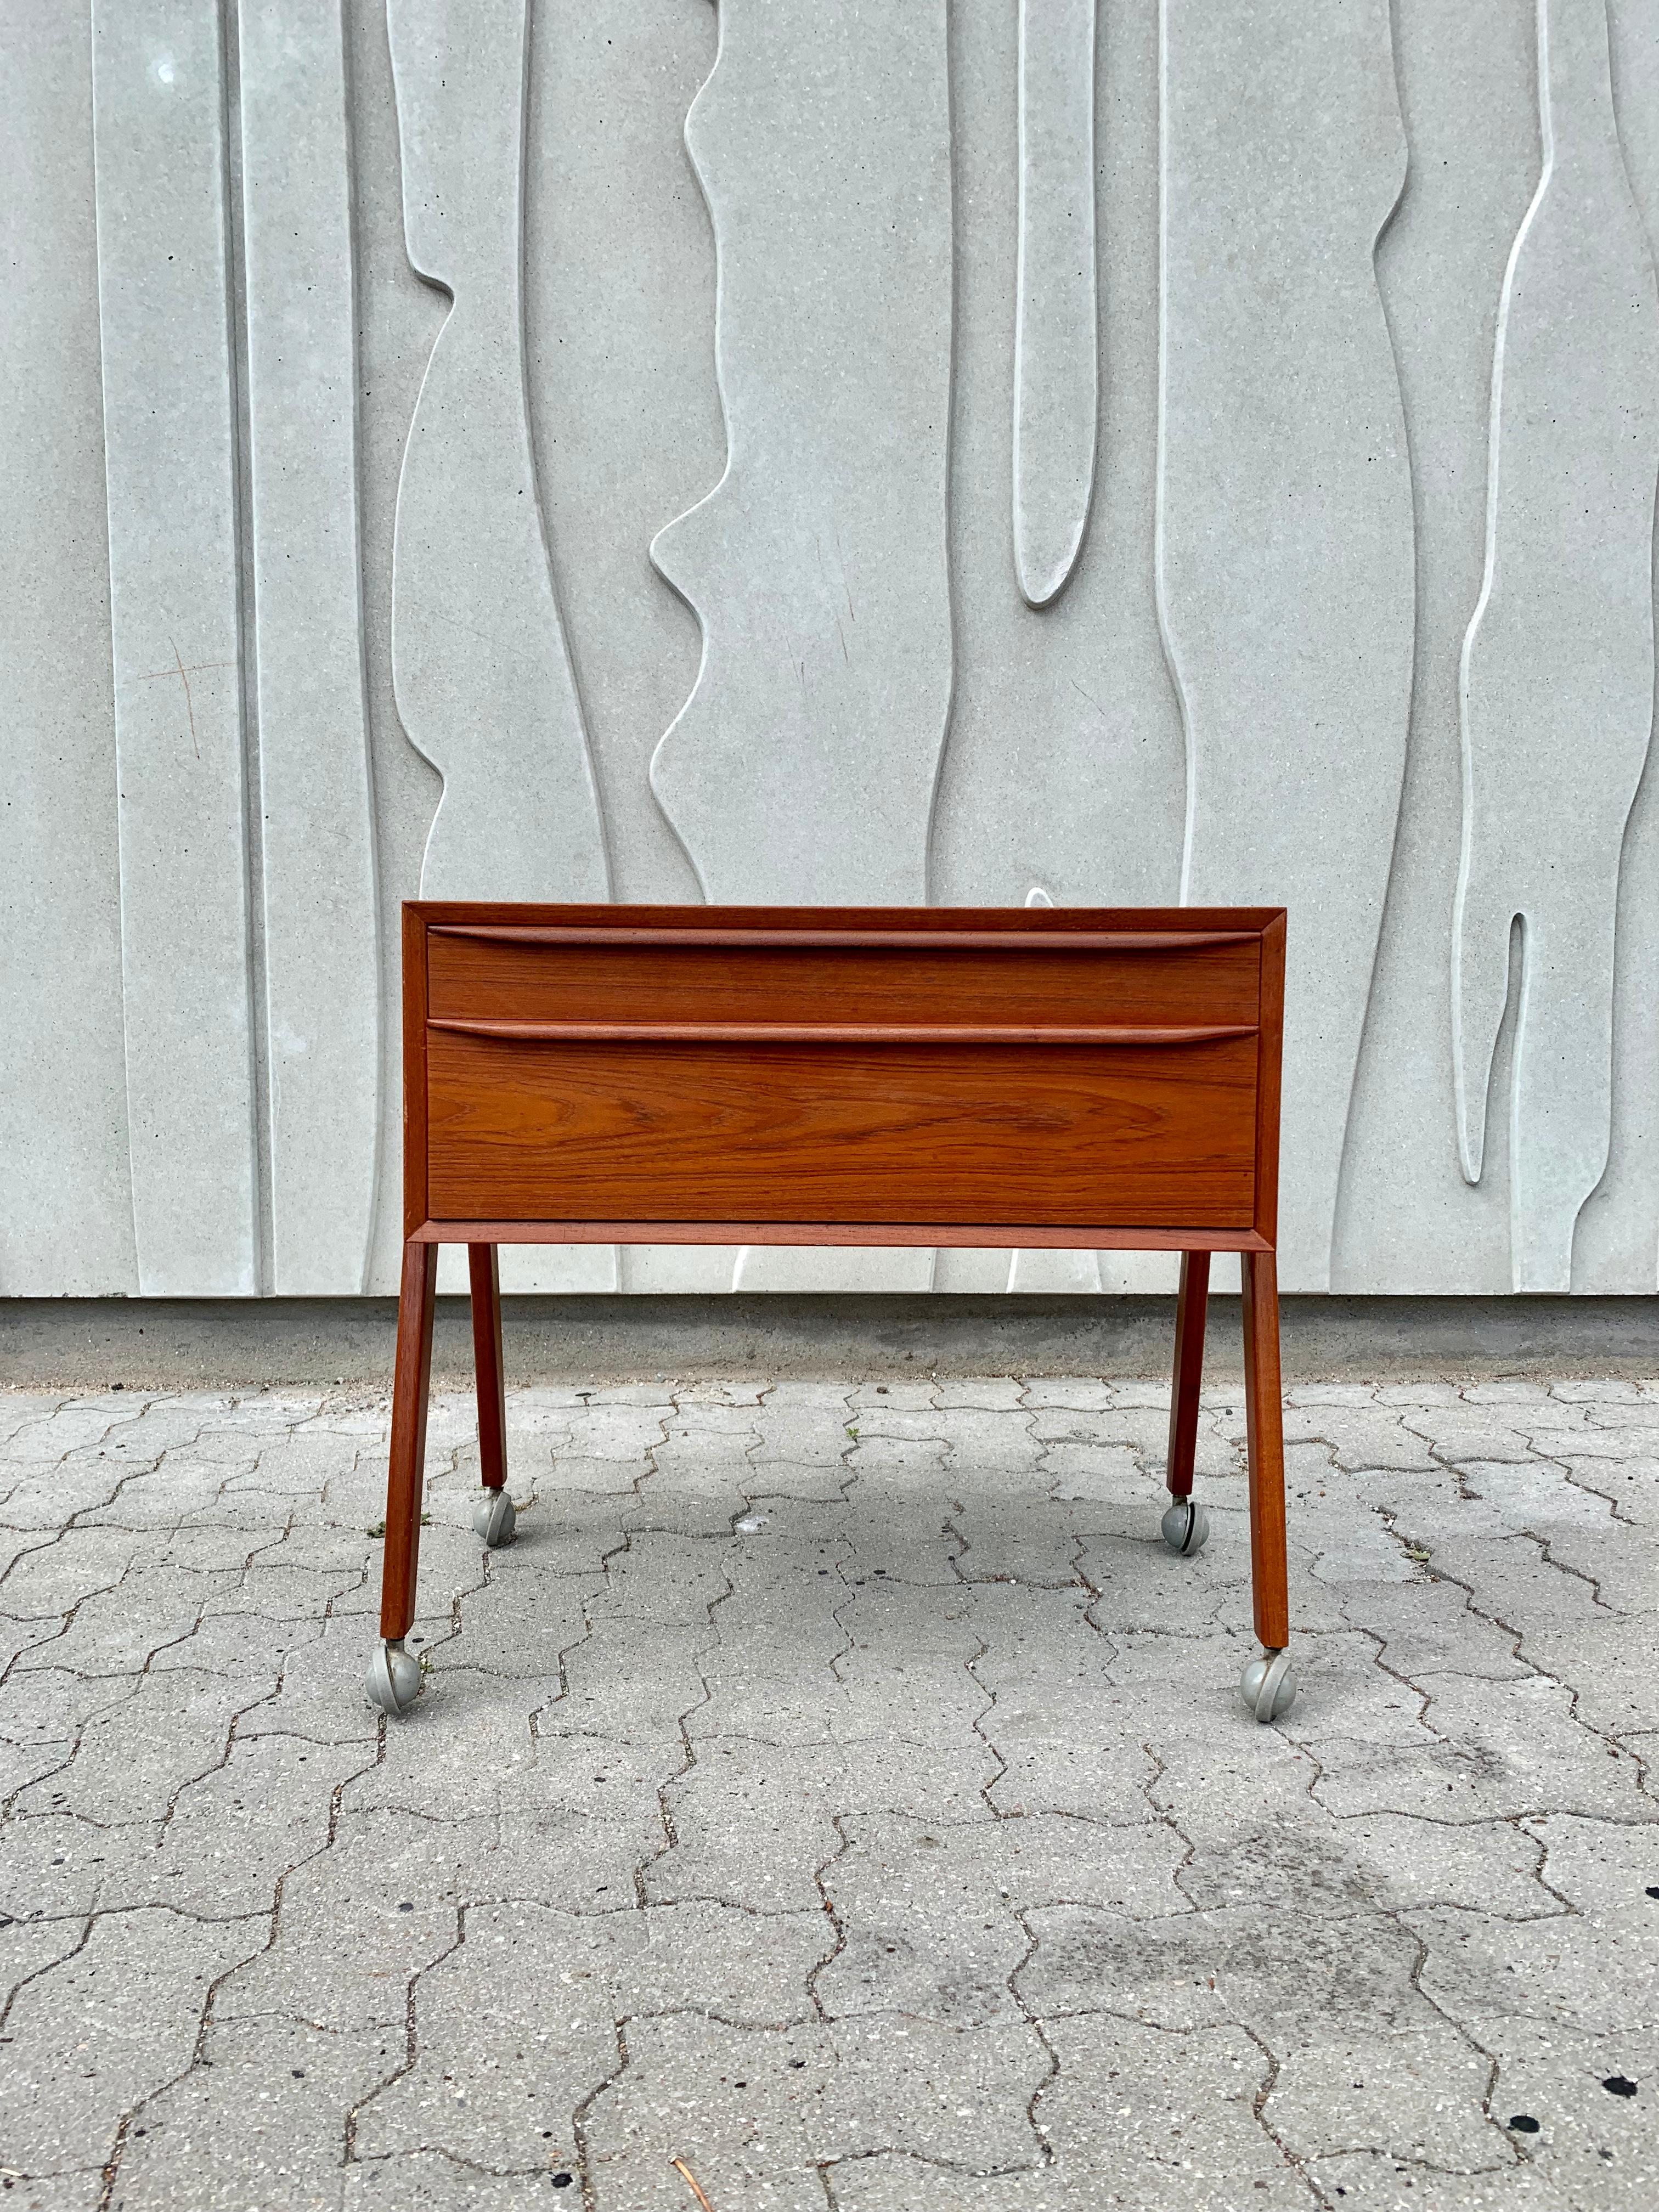 Stunning cabinet designed and manufactured in Denmark. Featuring two drawers and a base made of solid teak, stands on castors. In the style of Arne Vodder.